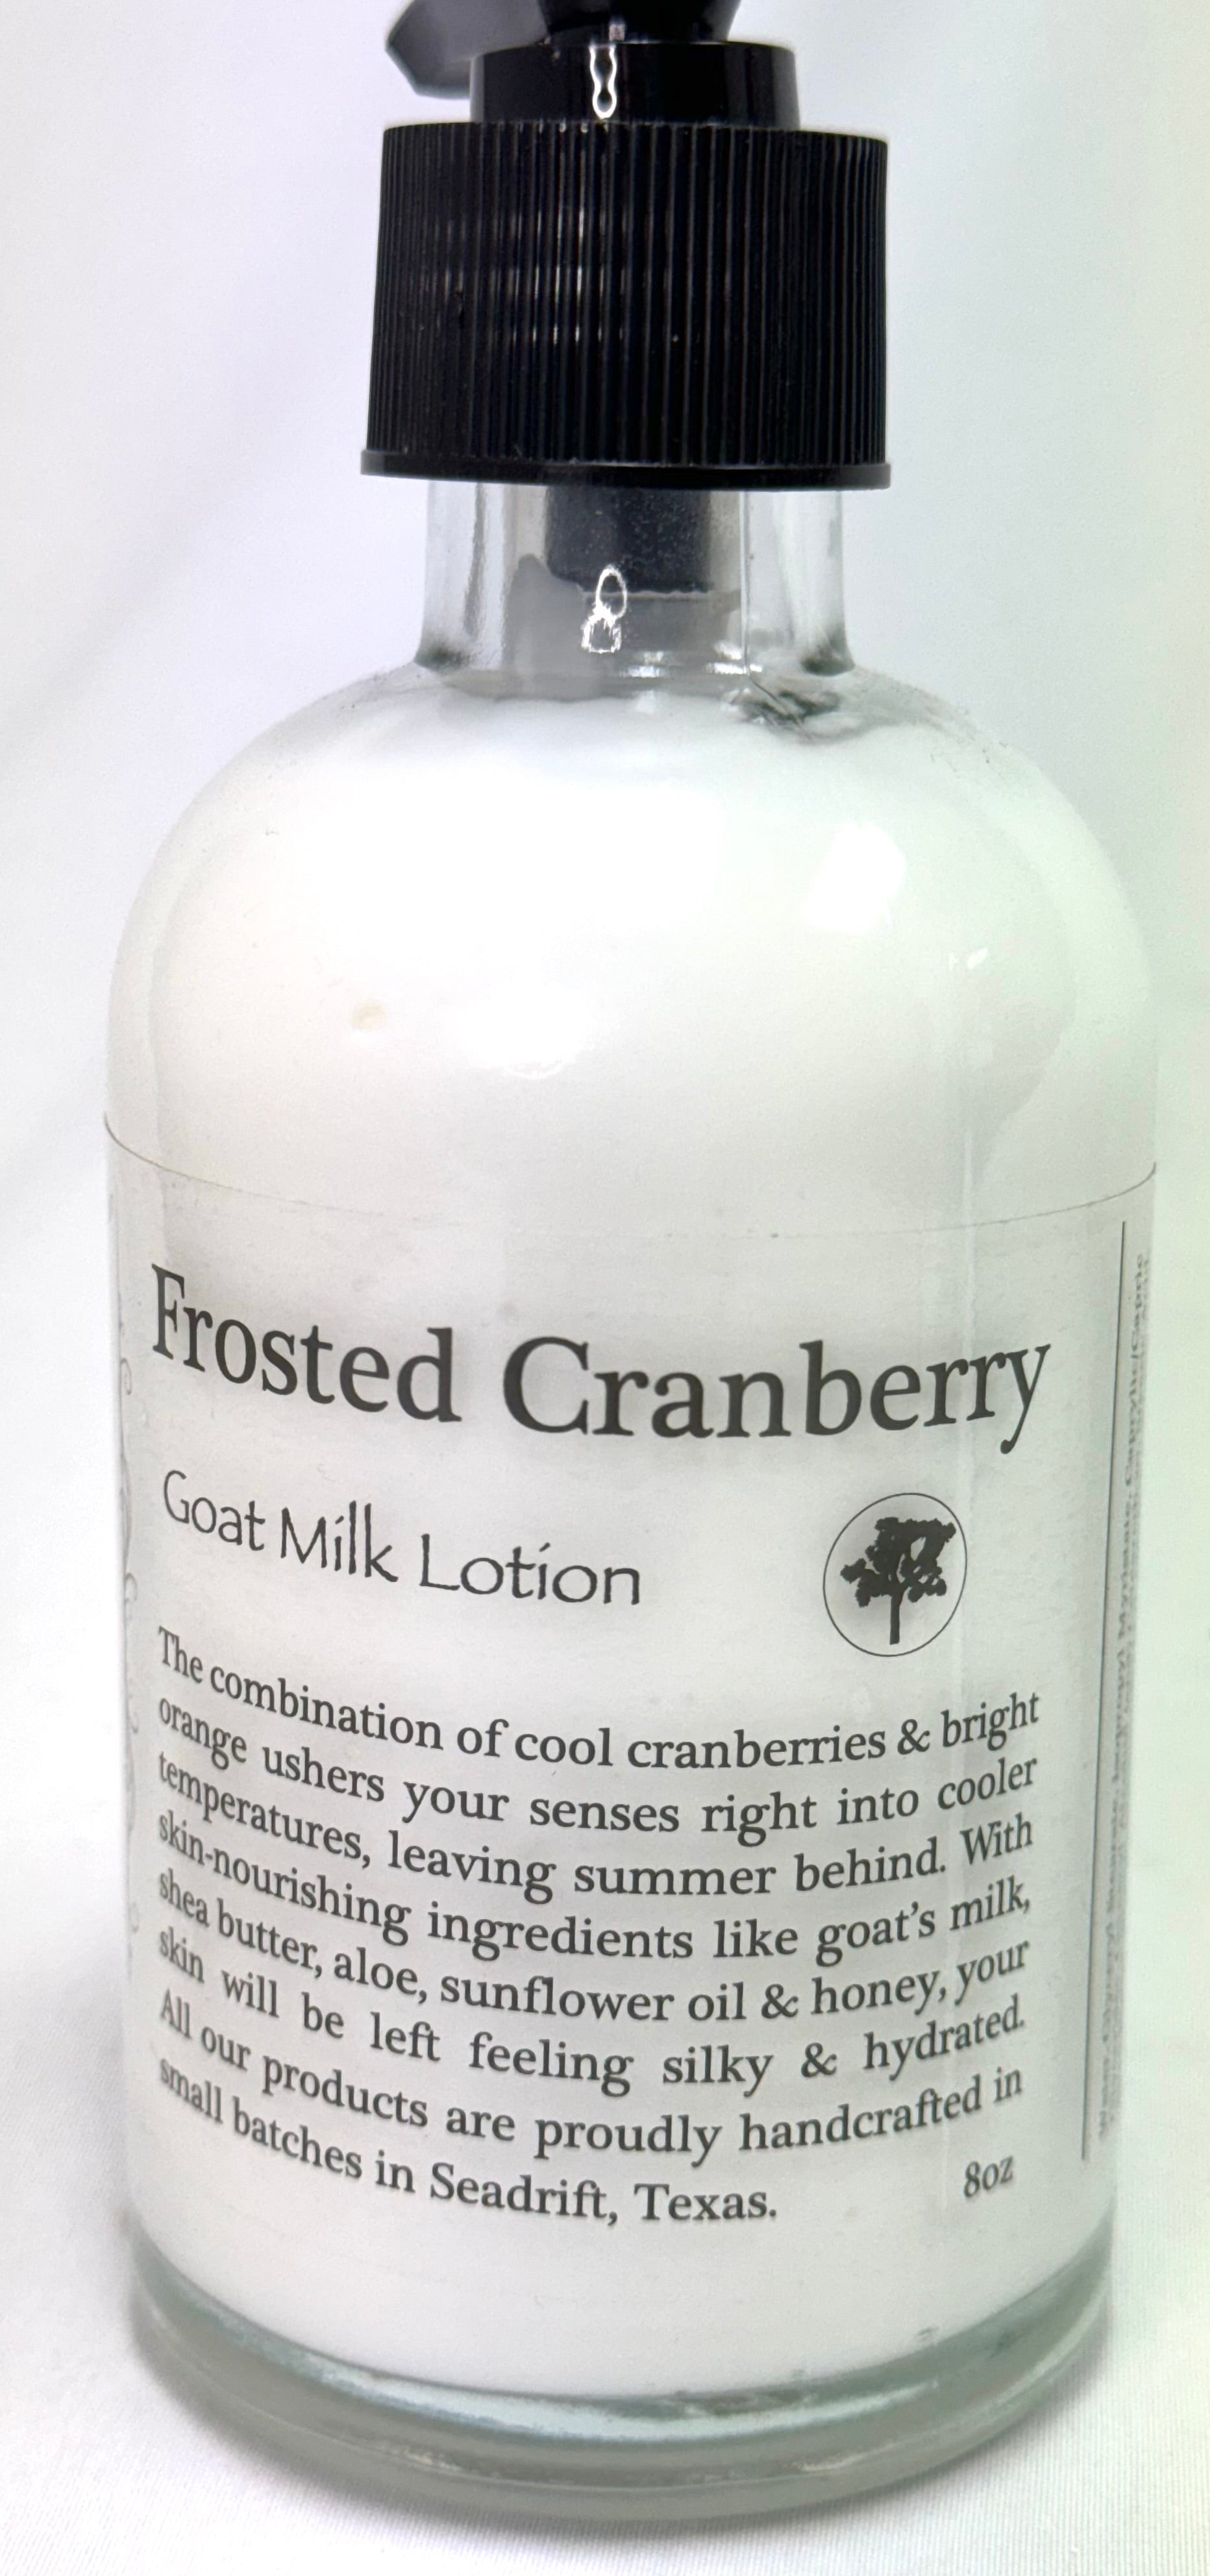 8oz Goat Milk Lotion: Frosted Cranberry